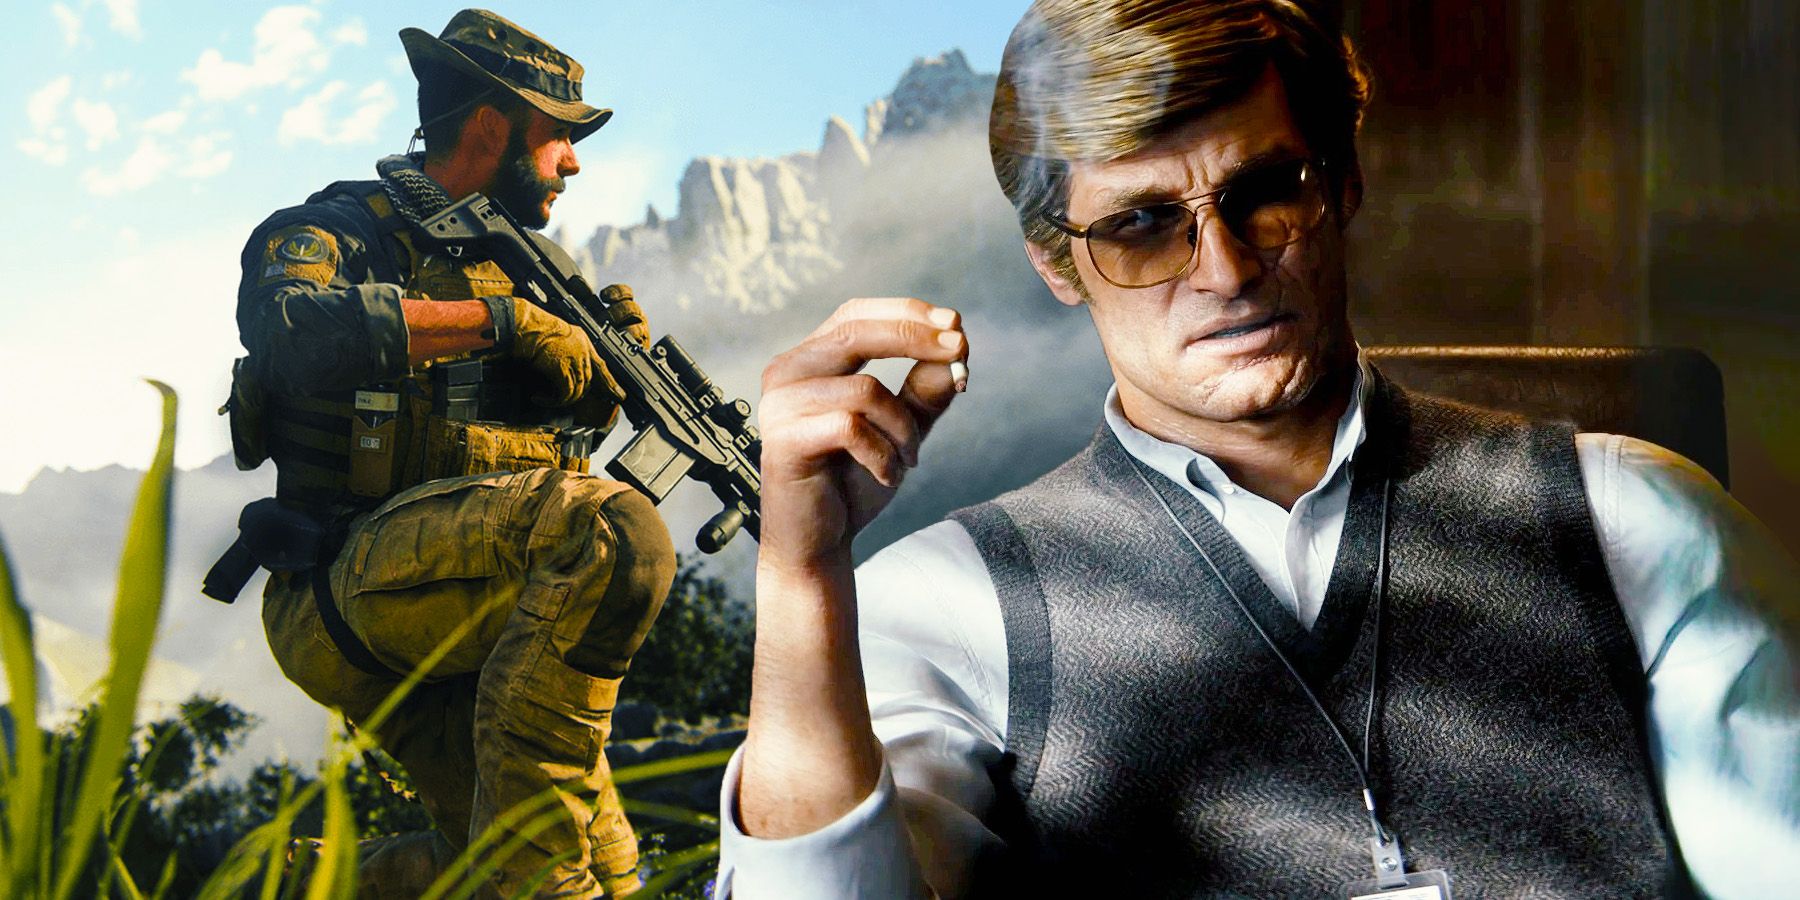 Captain Price kneels with a rifle in a screenshot from Modern Warfare 3, while Russell Adler smokes in a screenshot from Black Ops Cold War.